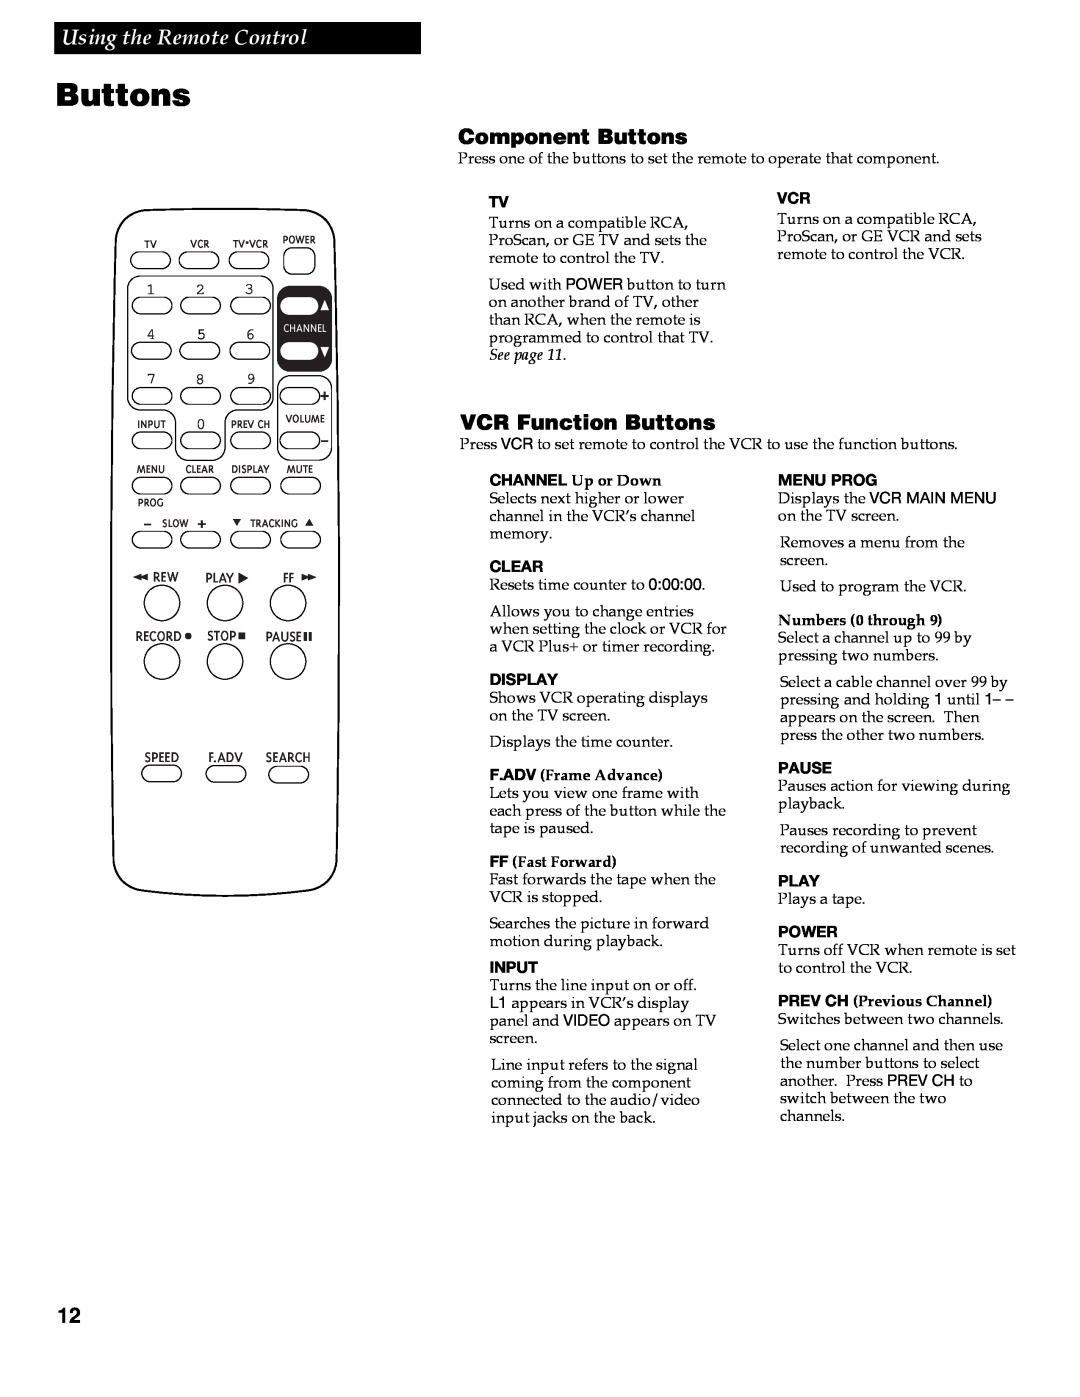 RCA VR618HF Component Buttons, VCR Function Buttons, Using the Remote Control, Clear, Display, FFFast Forward, Input 